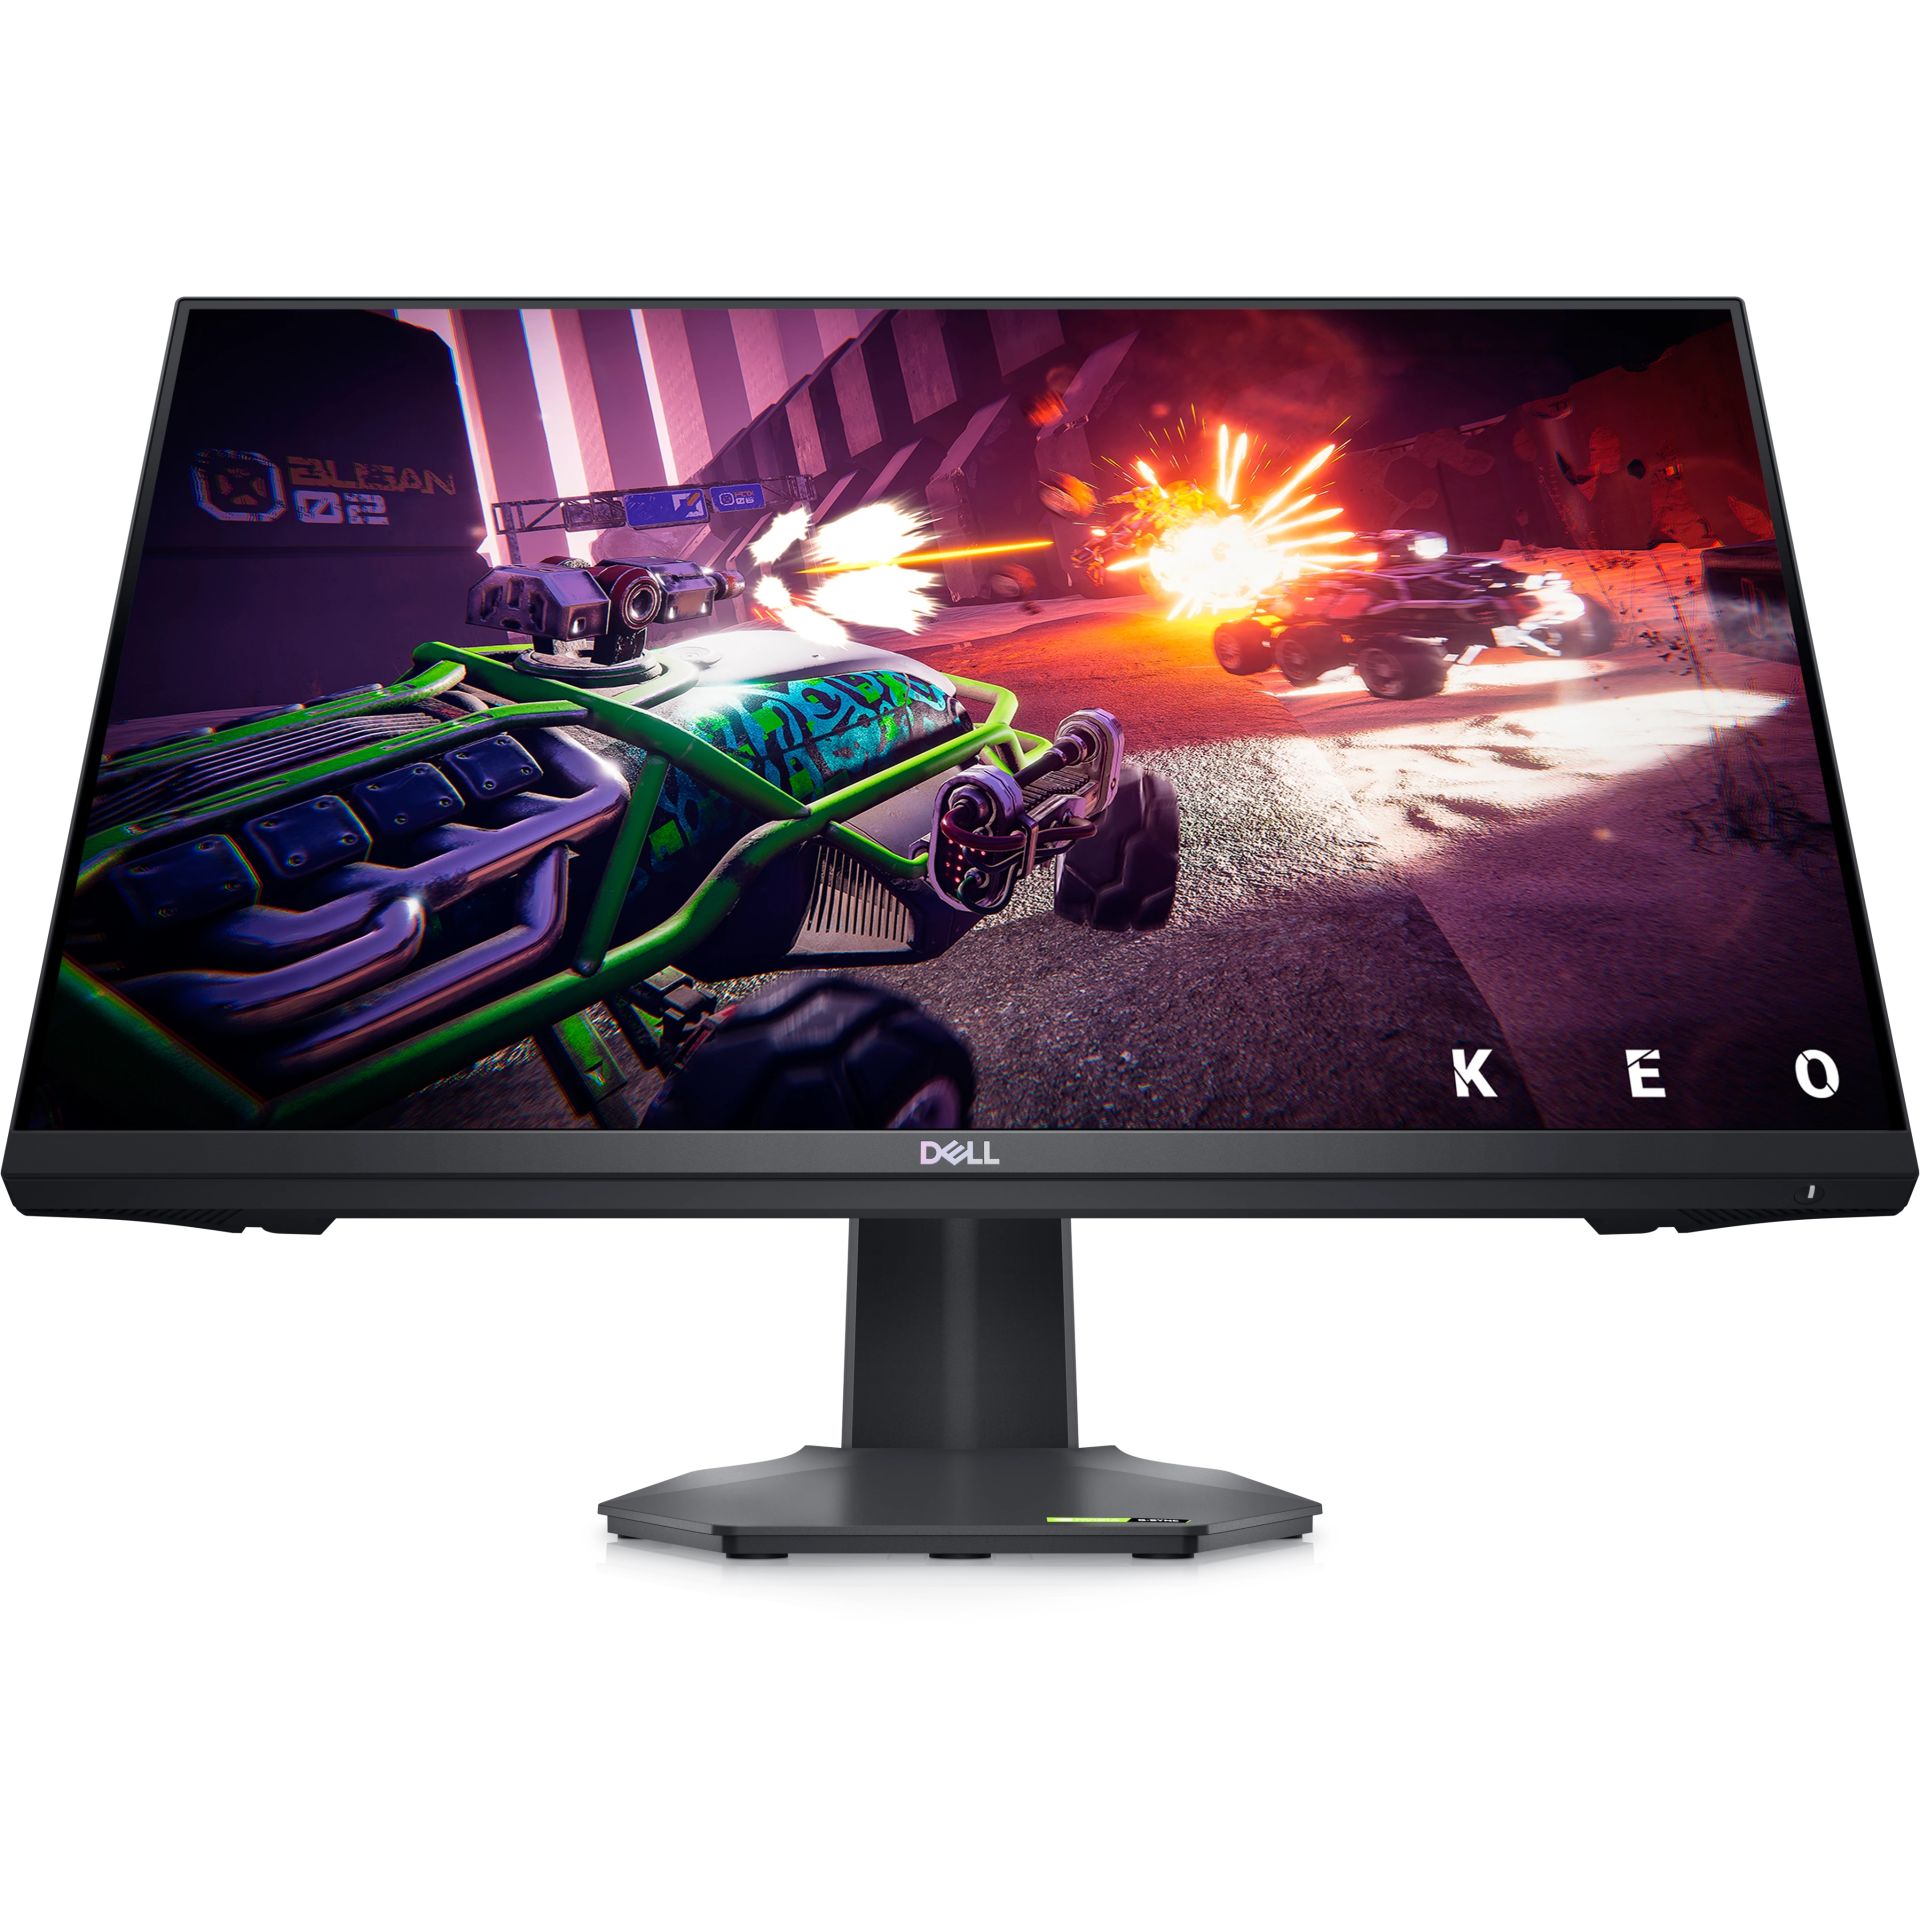 DELL G2422HS 23.8'' 1MS 165HZ 1920x1080 2xHDMI/DP IPS LED MONITOR